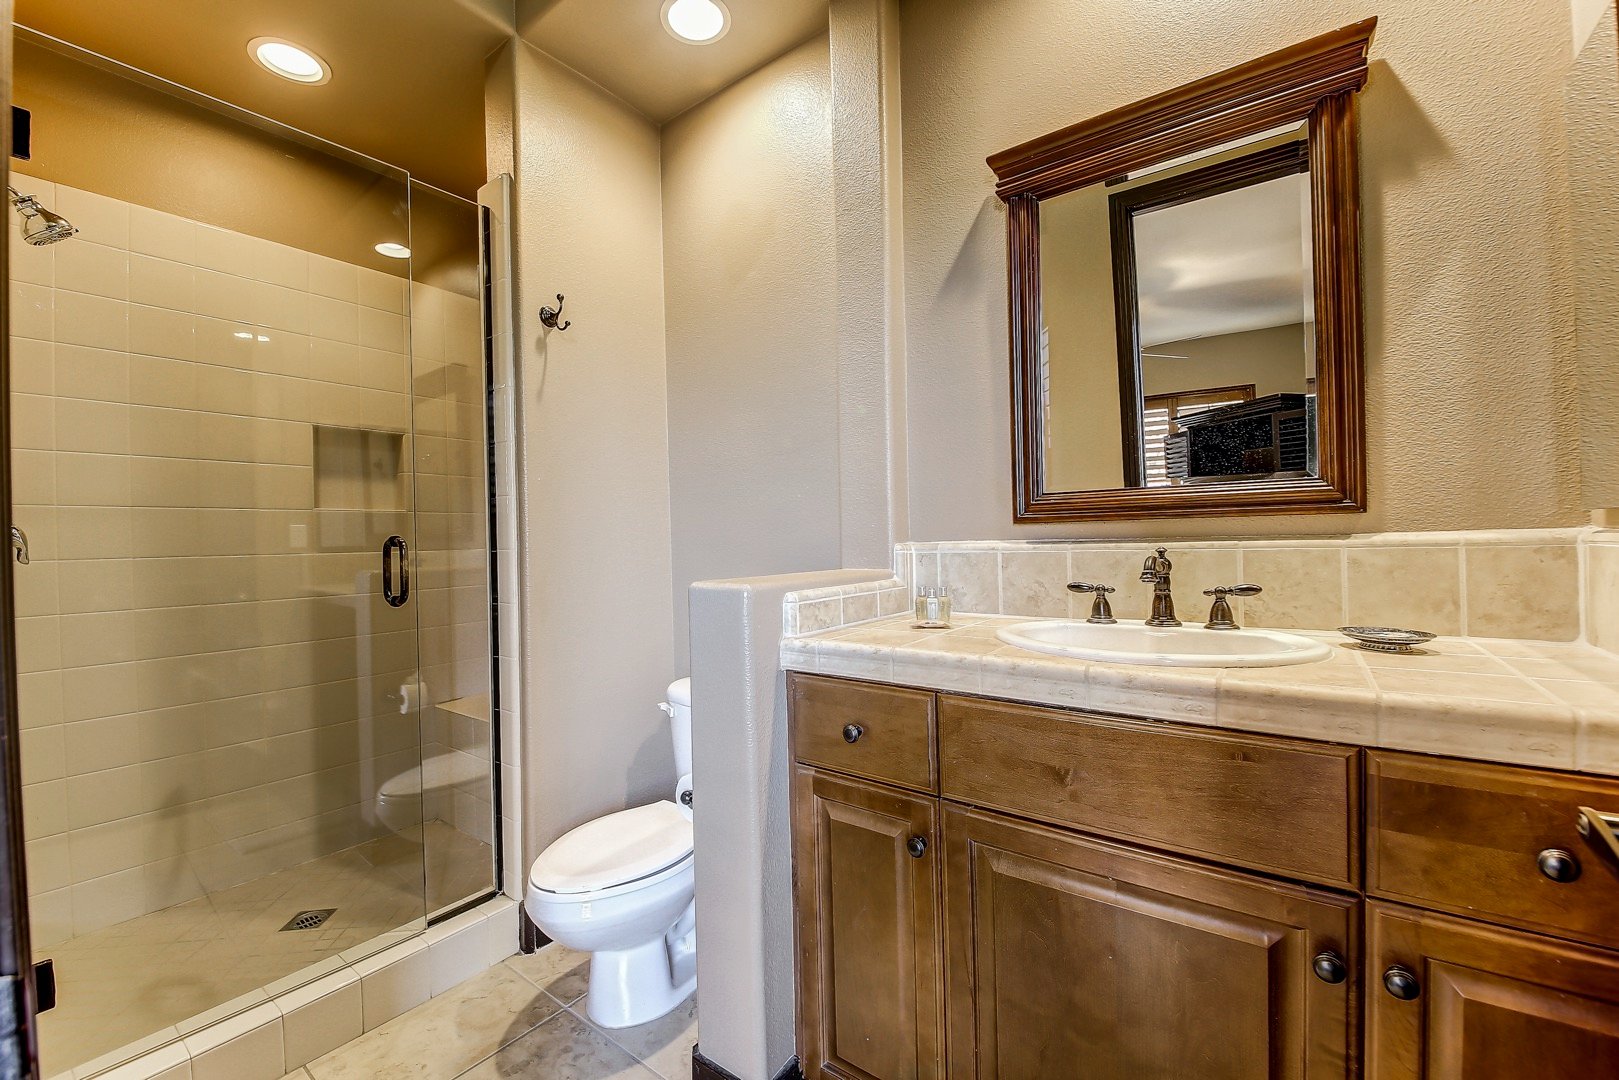 Casita Suite 2 bathroom features a tile shower and a vanity sink.